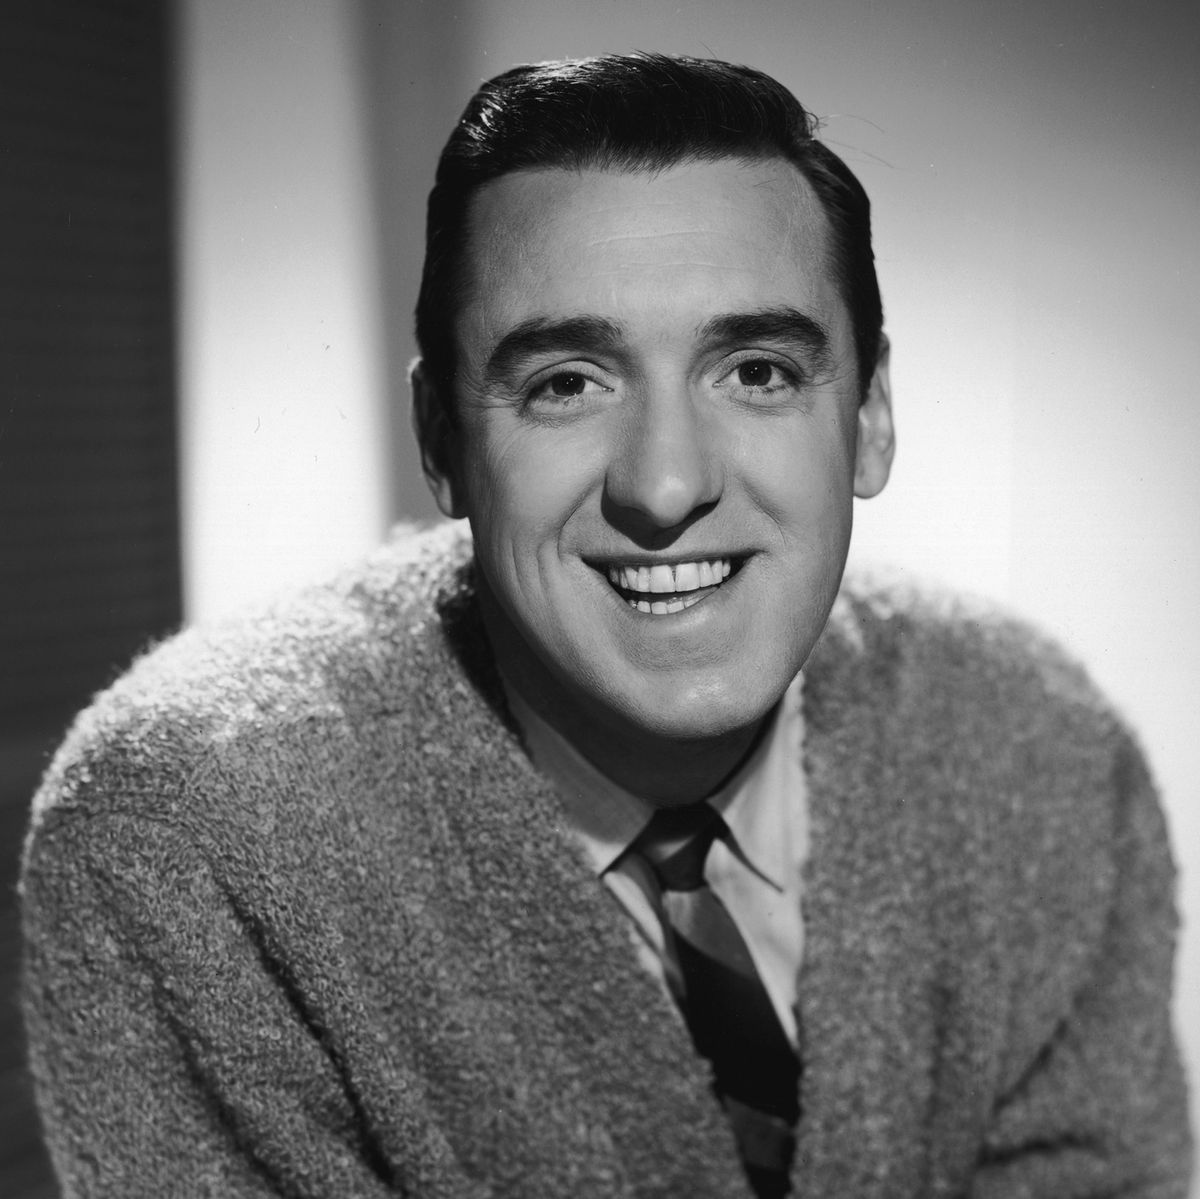 Jim Naborscirca 1965: Promotional studio portrait of American actor and singer Jim Nabors. (Photo by Hulton Archive/Getty Images)